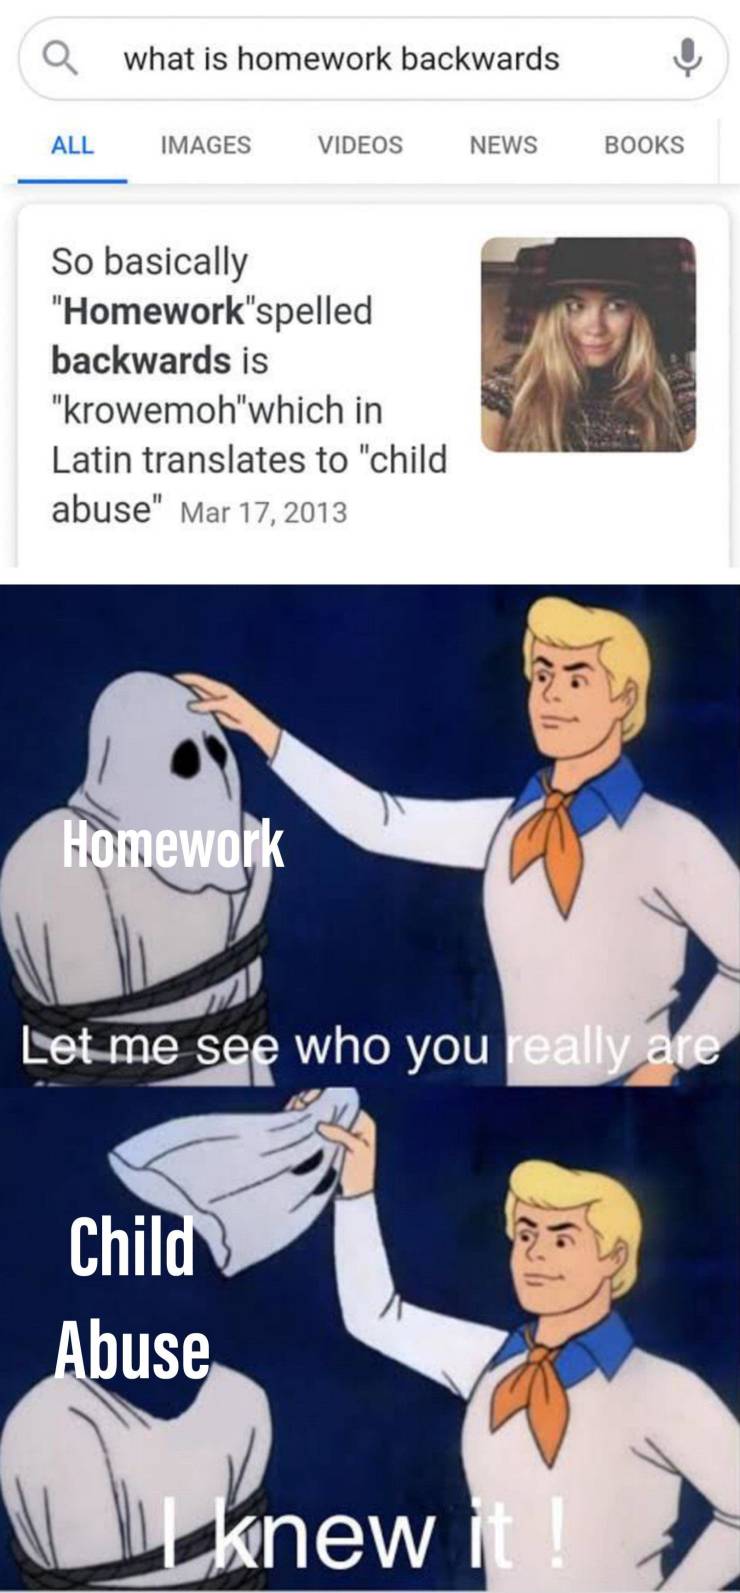 scooby doo homophobic meme - what is homework backwards All Images Videos News Books So basically "Homework"spelled backwards is "krowemoh" which in Latin translates to "child abuse" Homework Let me see who you really are 16 Child Abuse knew it